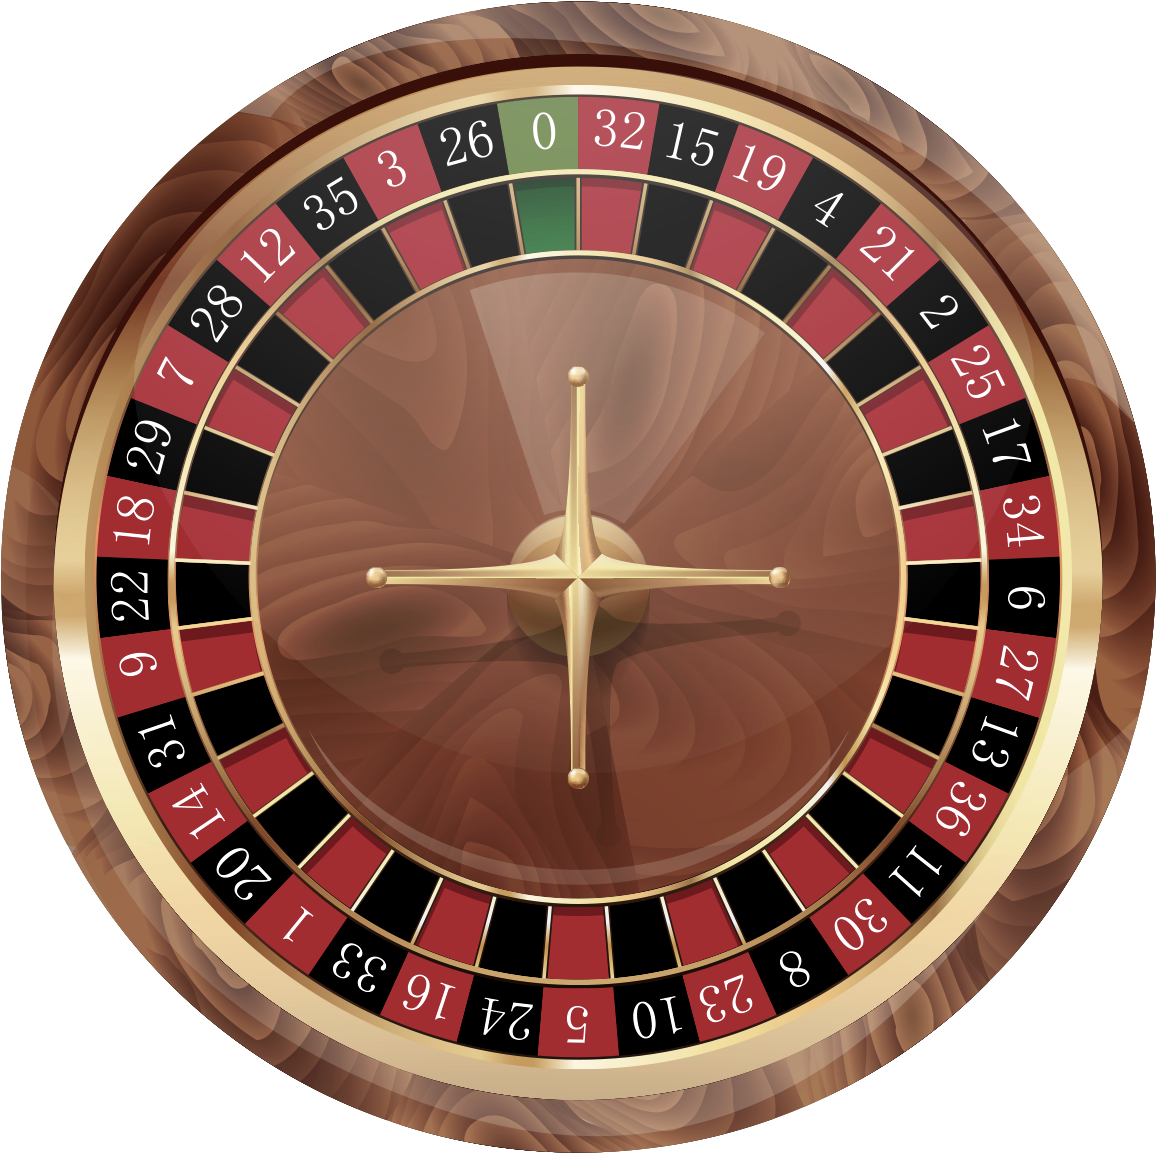 The Parlay Roulette System